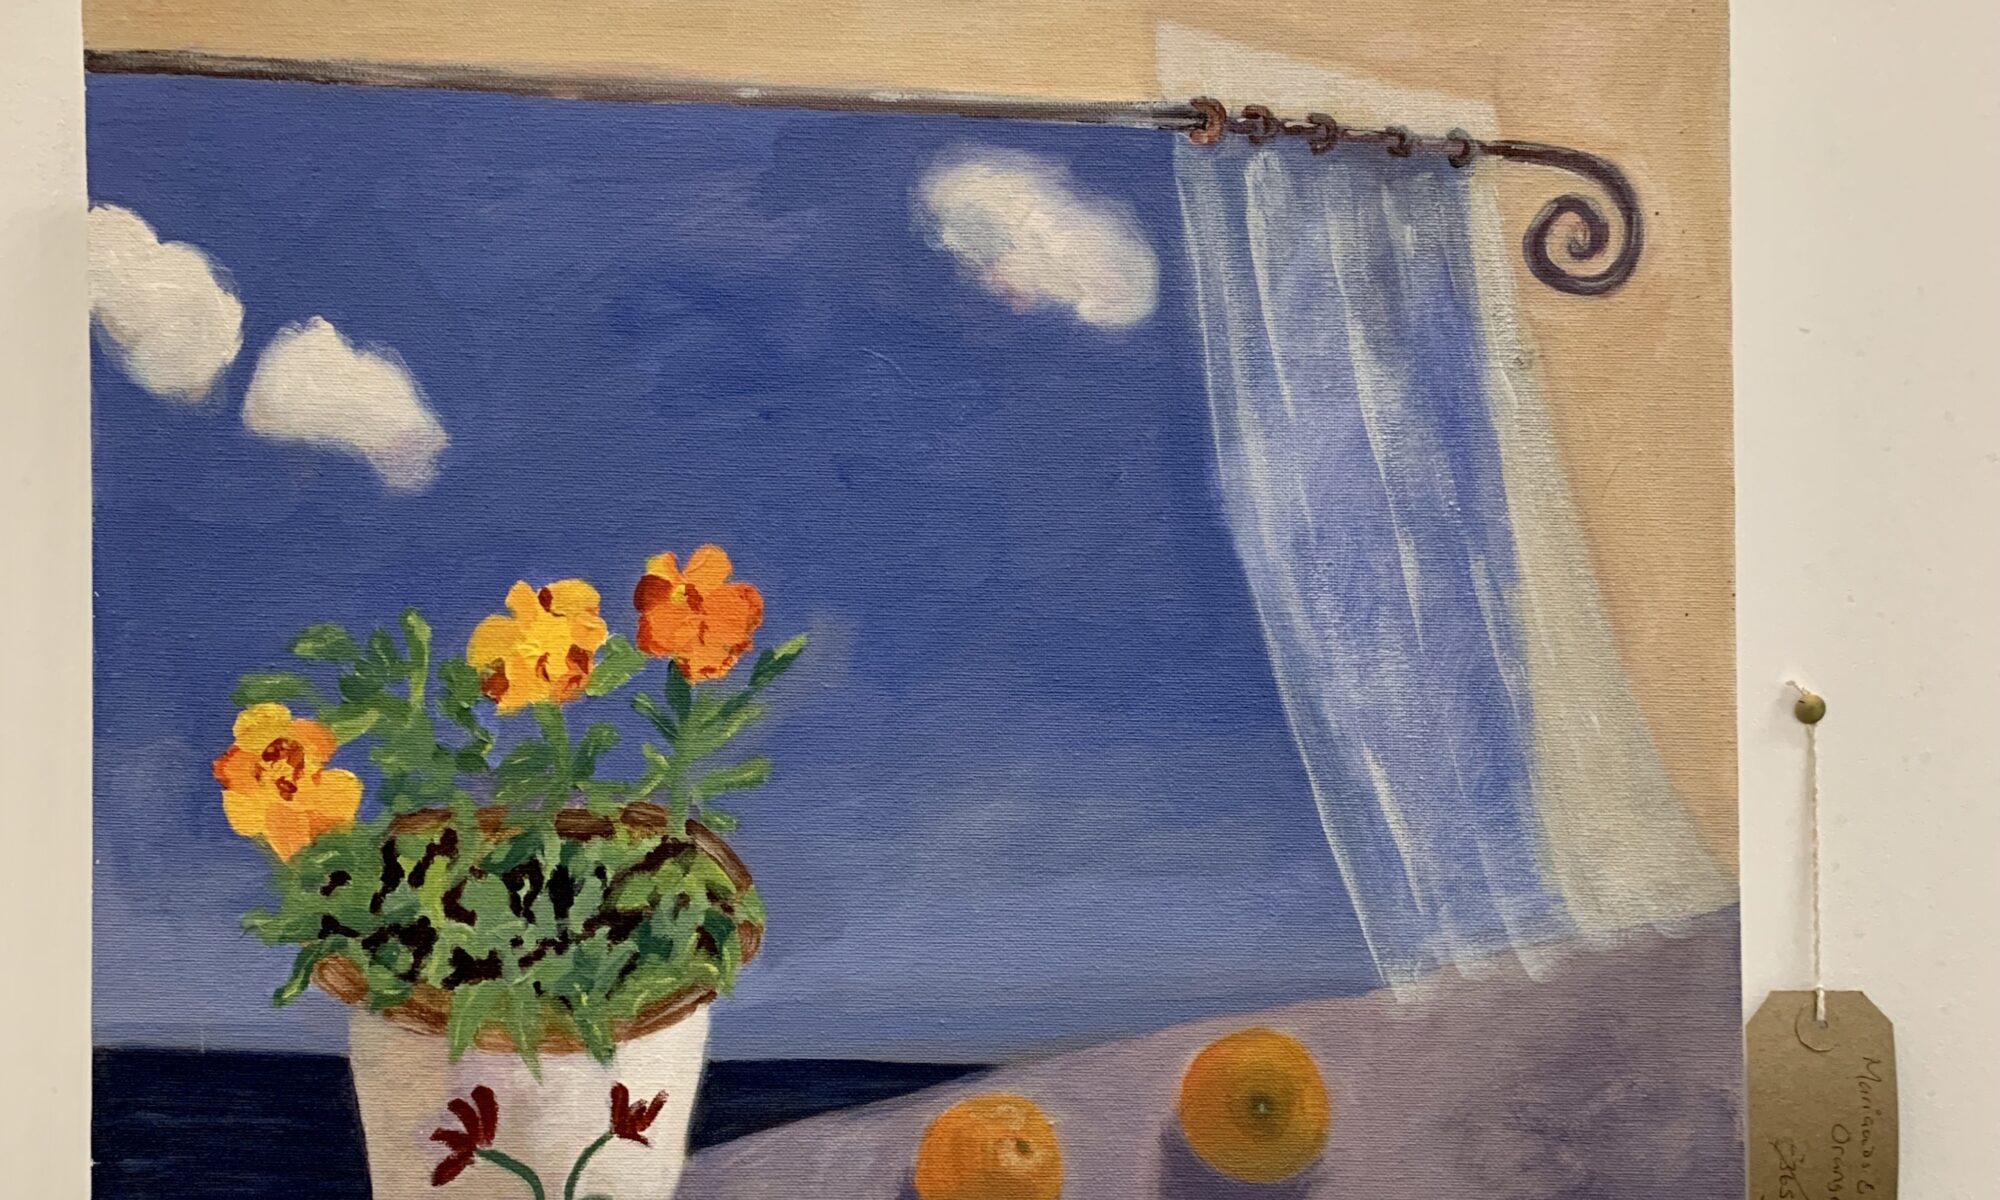 Marigolds and Oranges - Oil on Canvas